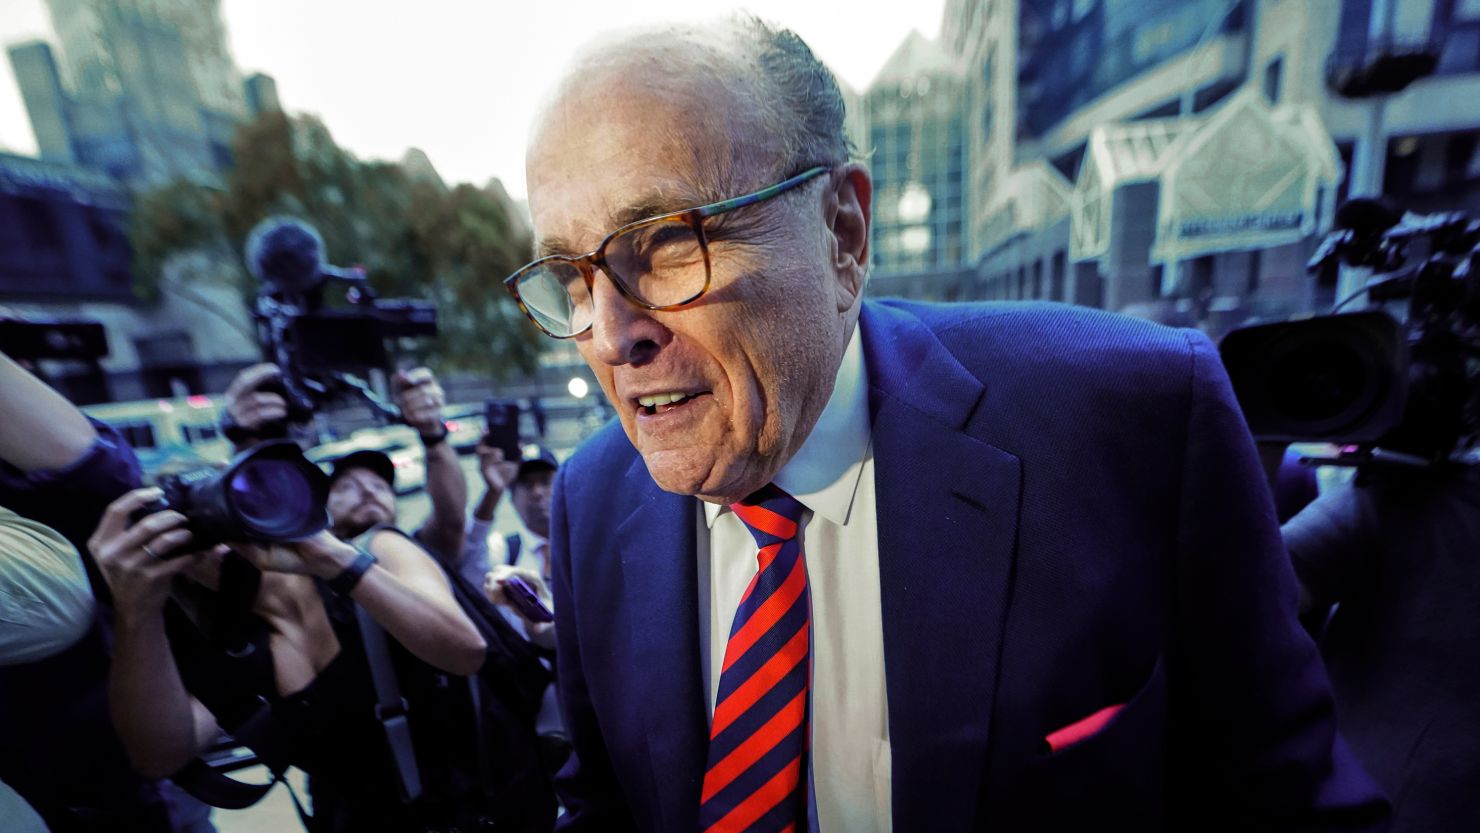 Rudy Giuliani arrives at the Fulton County Courthouse, Aug. 17, 2022, in Atlanta.